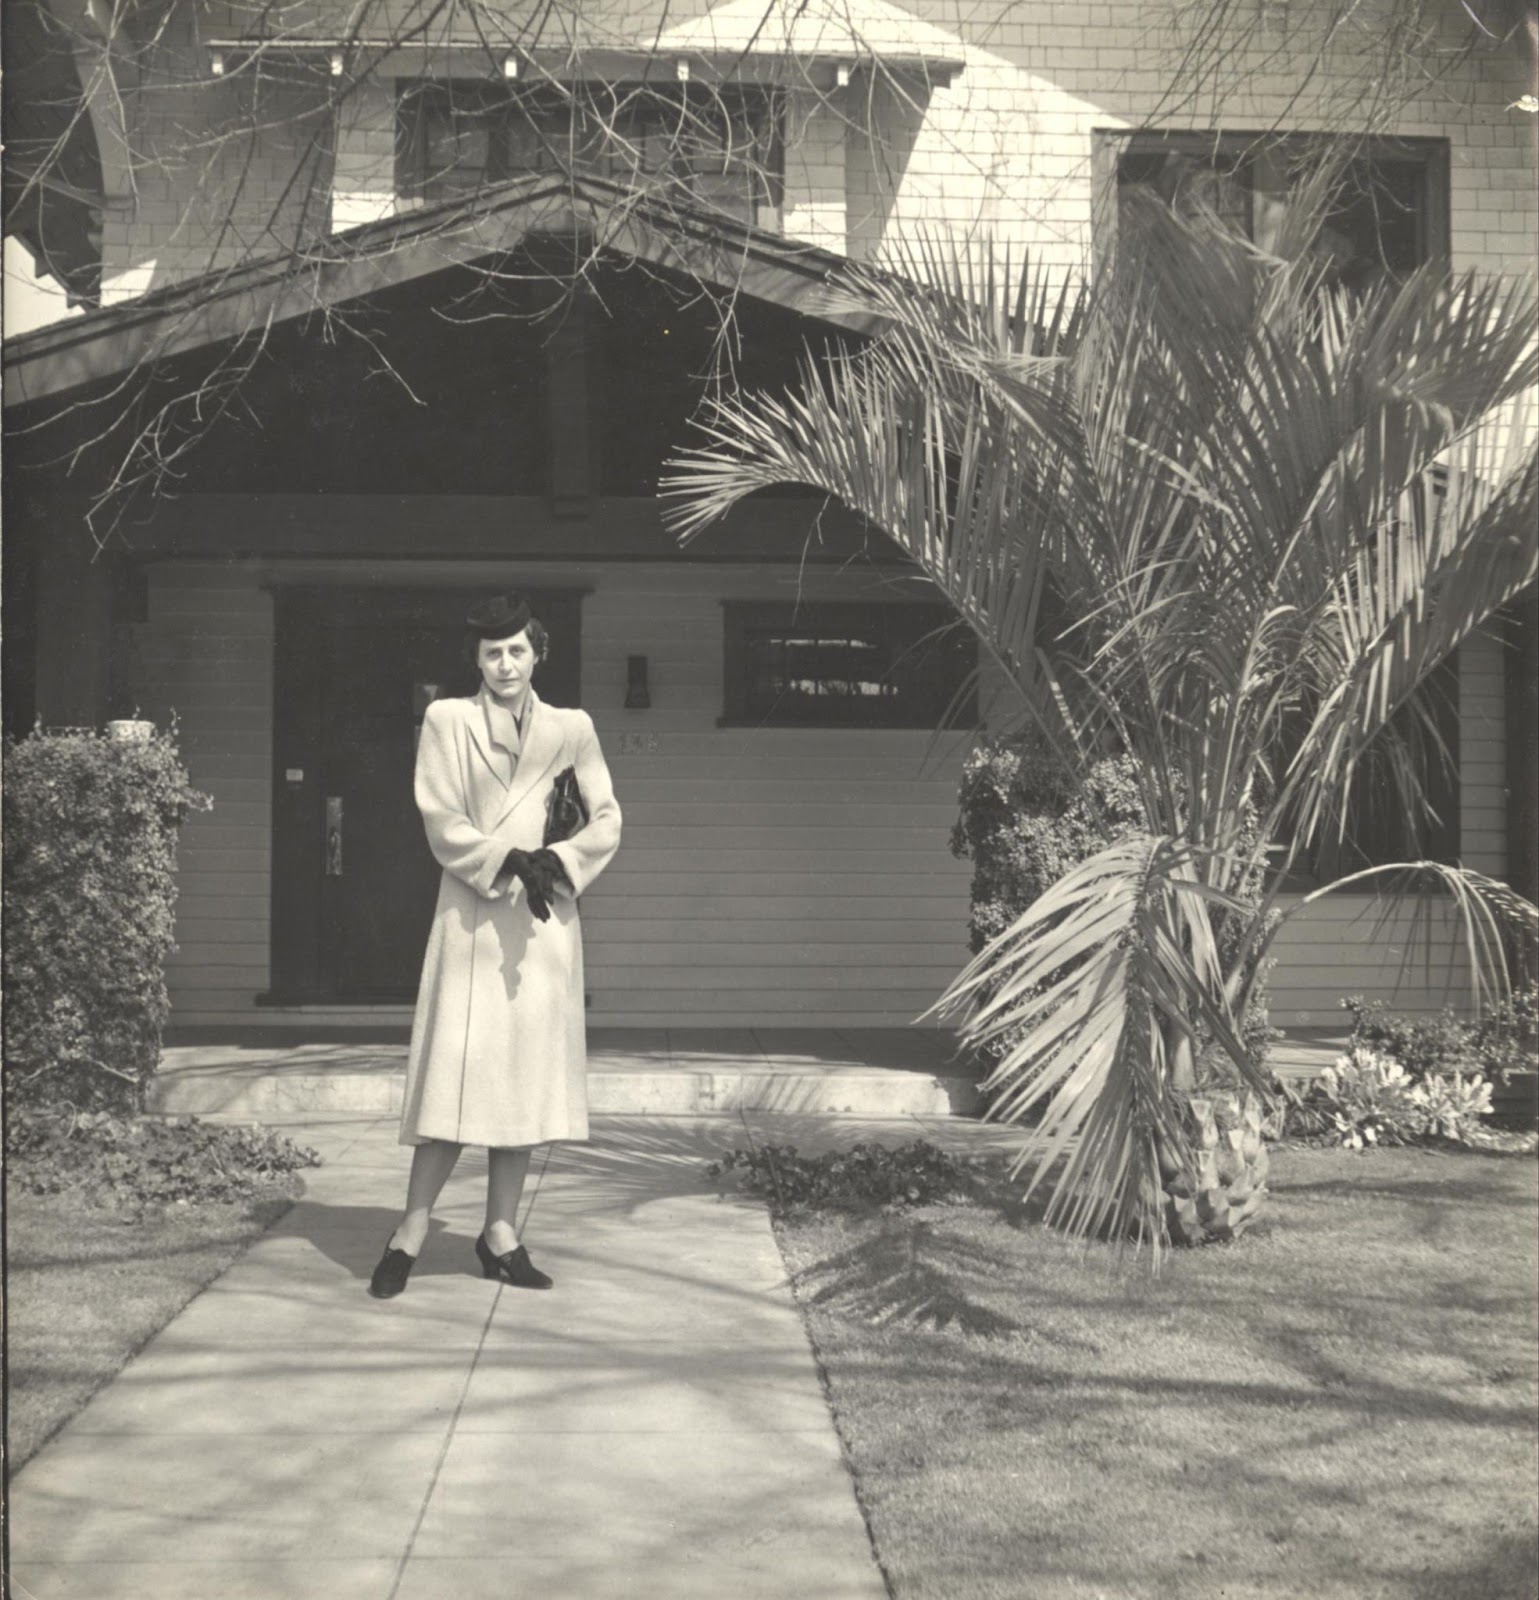 Sepia image of a woman wearing a long coat and dark gloves, tucking a bag under her arm, in front of a house next to a short palm tree.